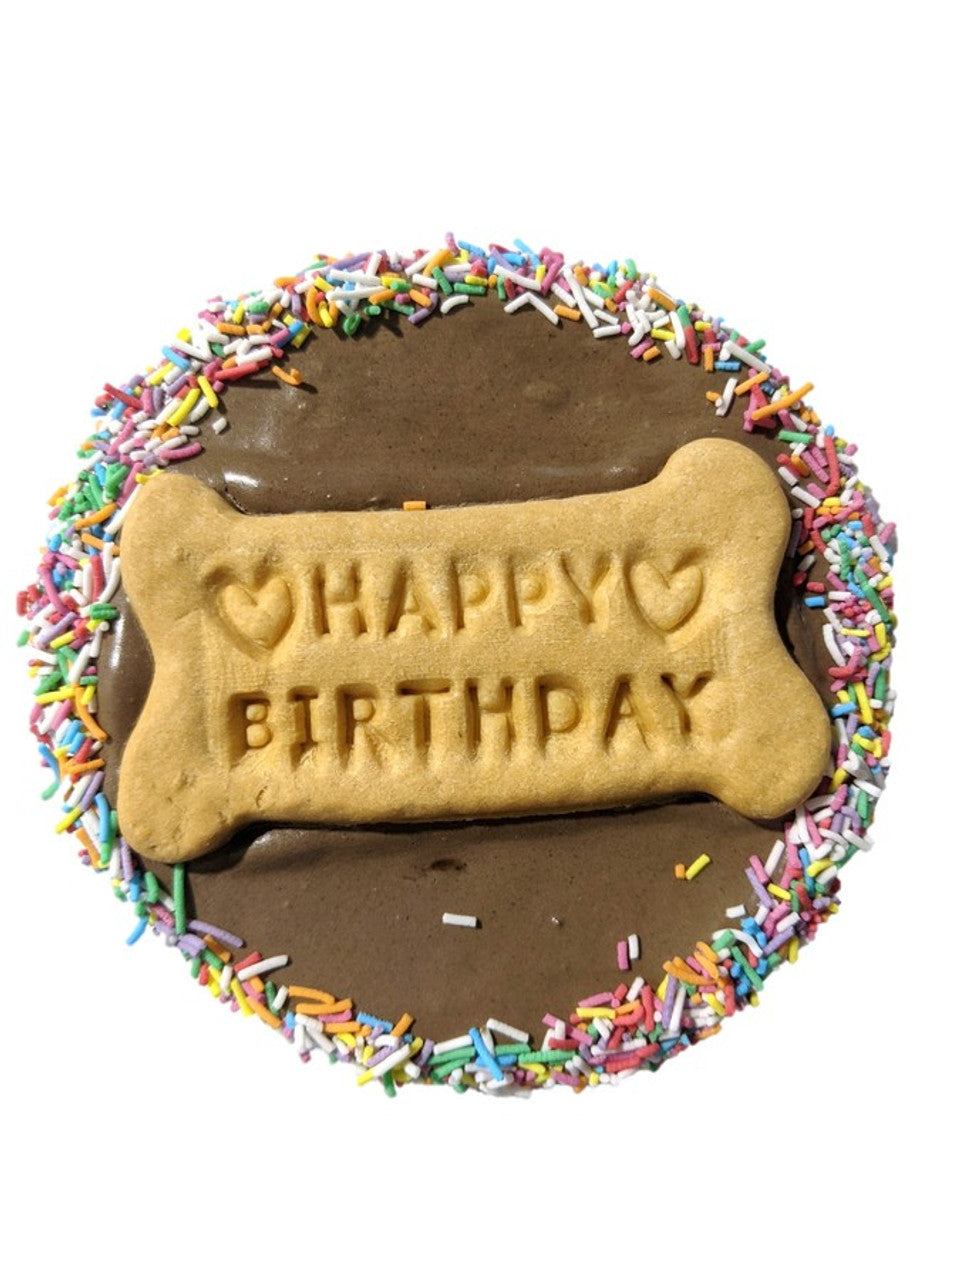 Doggy Birthday Cake With Bone Shape Biscuit Top